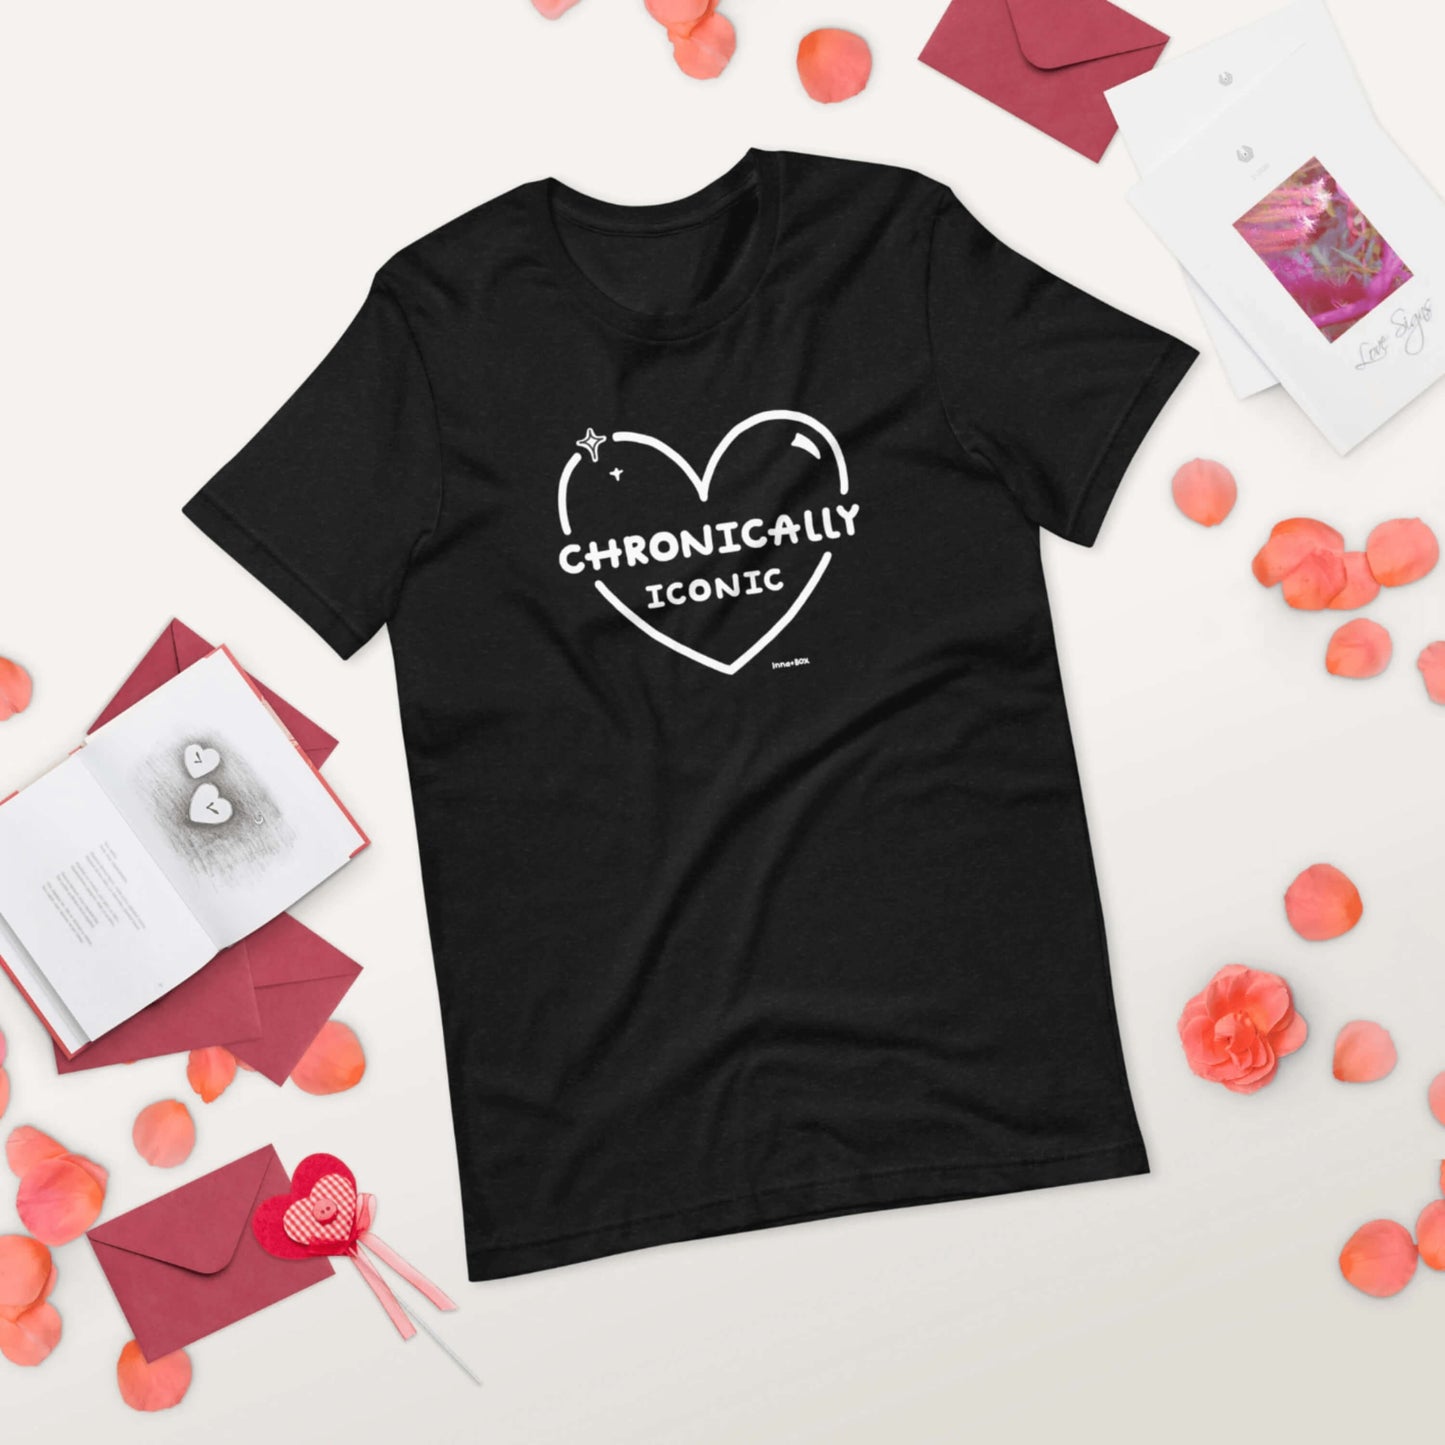 The Chronically Iconic black tee laying flat on a white background with valentines day cards, red envelopes and rose petals. The short sleeve t-shirt features a white heart outline with sparkles and centre text reading 'chronically iconic' with the innabox logo underneath. The design is raising awareness for chronic illness and invisible illness.